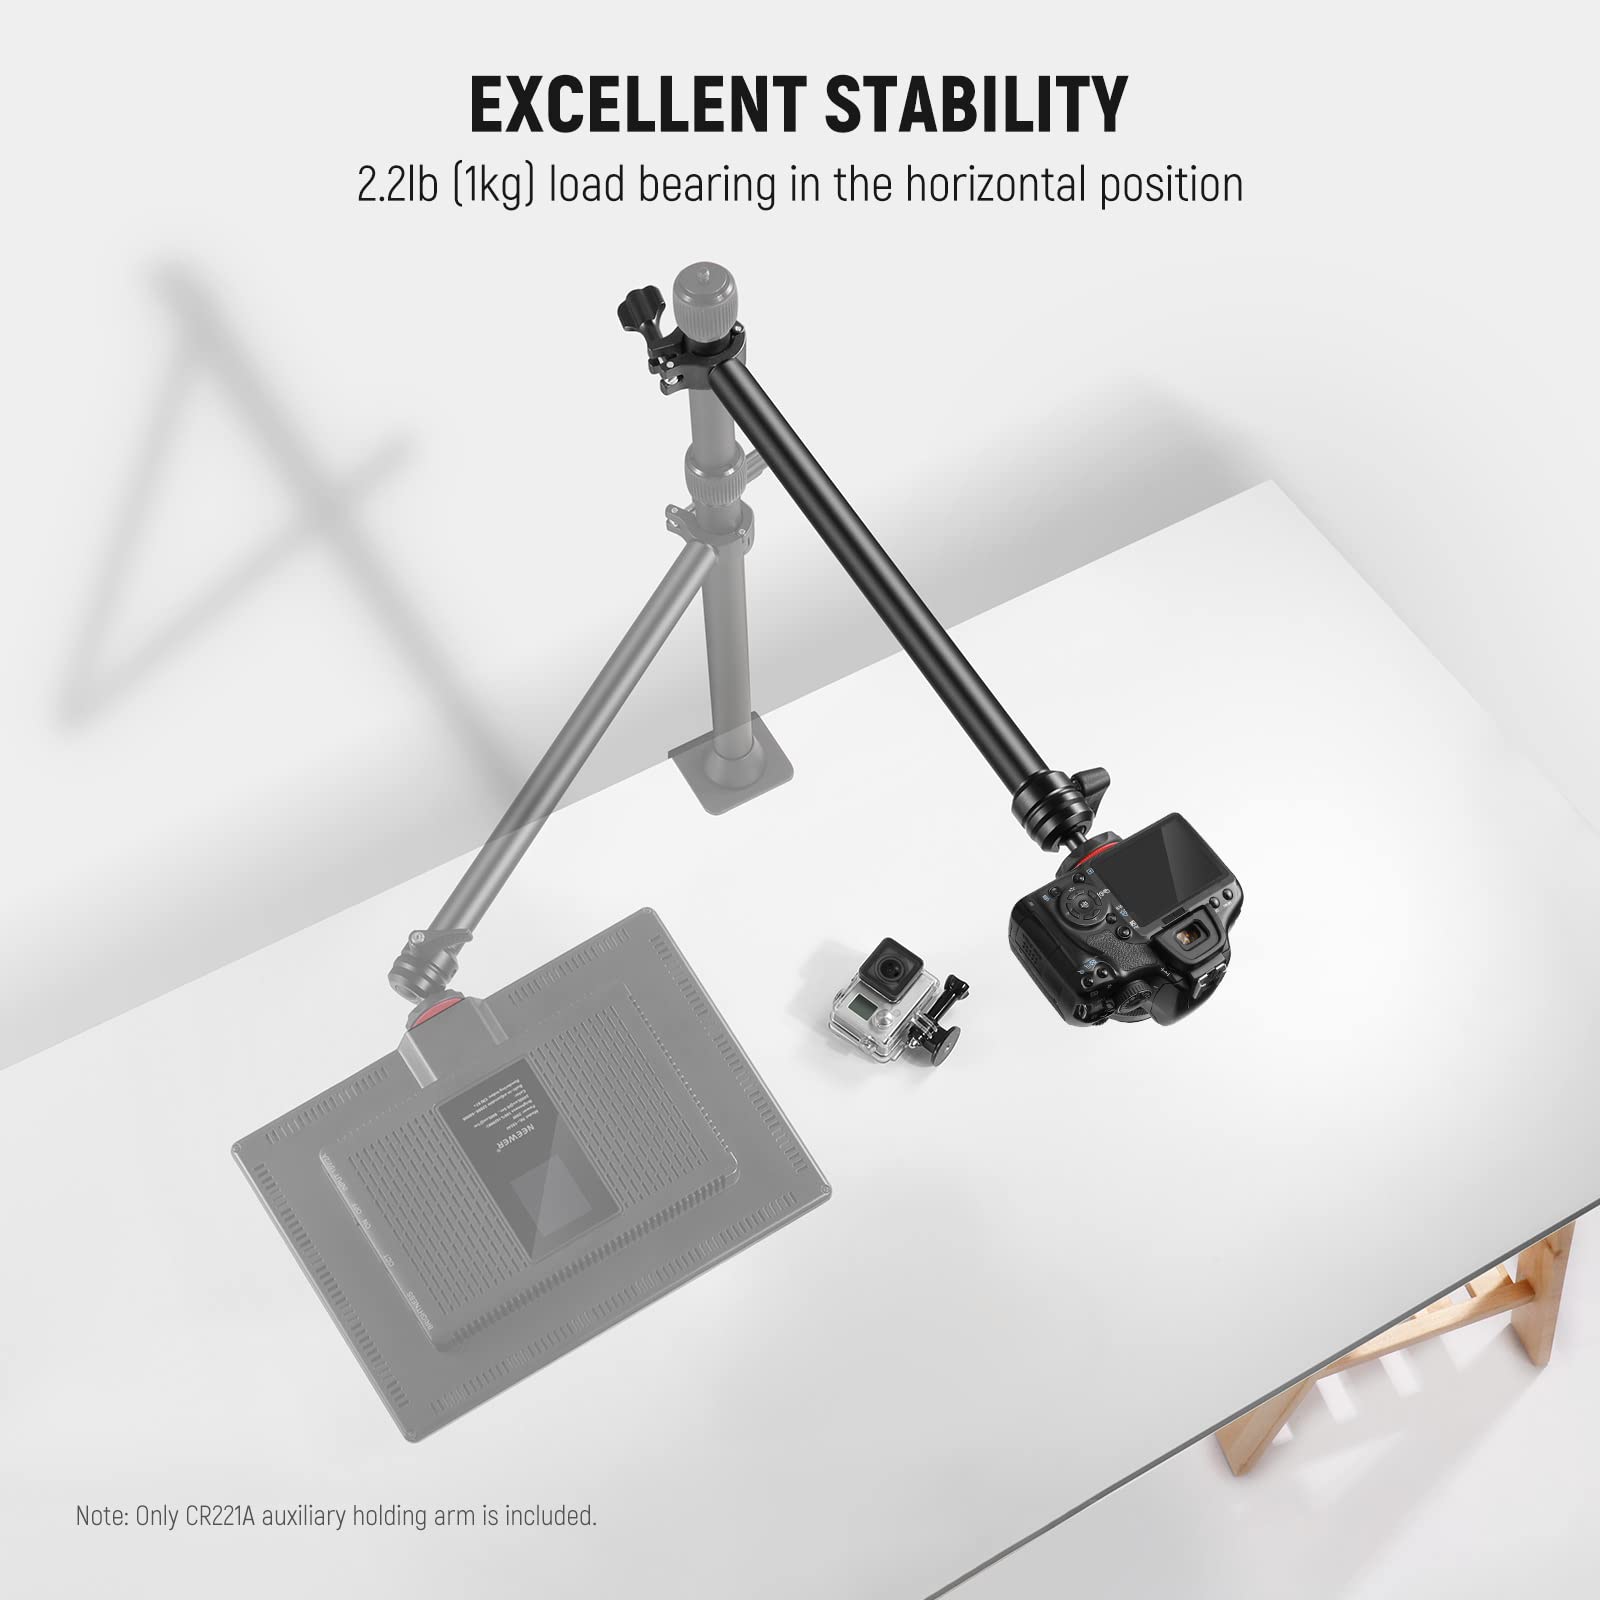 NEEWER 14.2”/36cm Flexible Holding Arm, Camera Mount Stand Overhead Extension Arm with 360° Swivel Ball Head and Adjustable Clamp for DSLR & Mirrorless Camera, Phone, LED Video Light, Webcam, CR221A